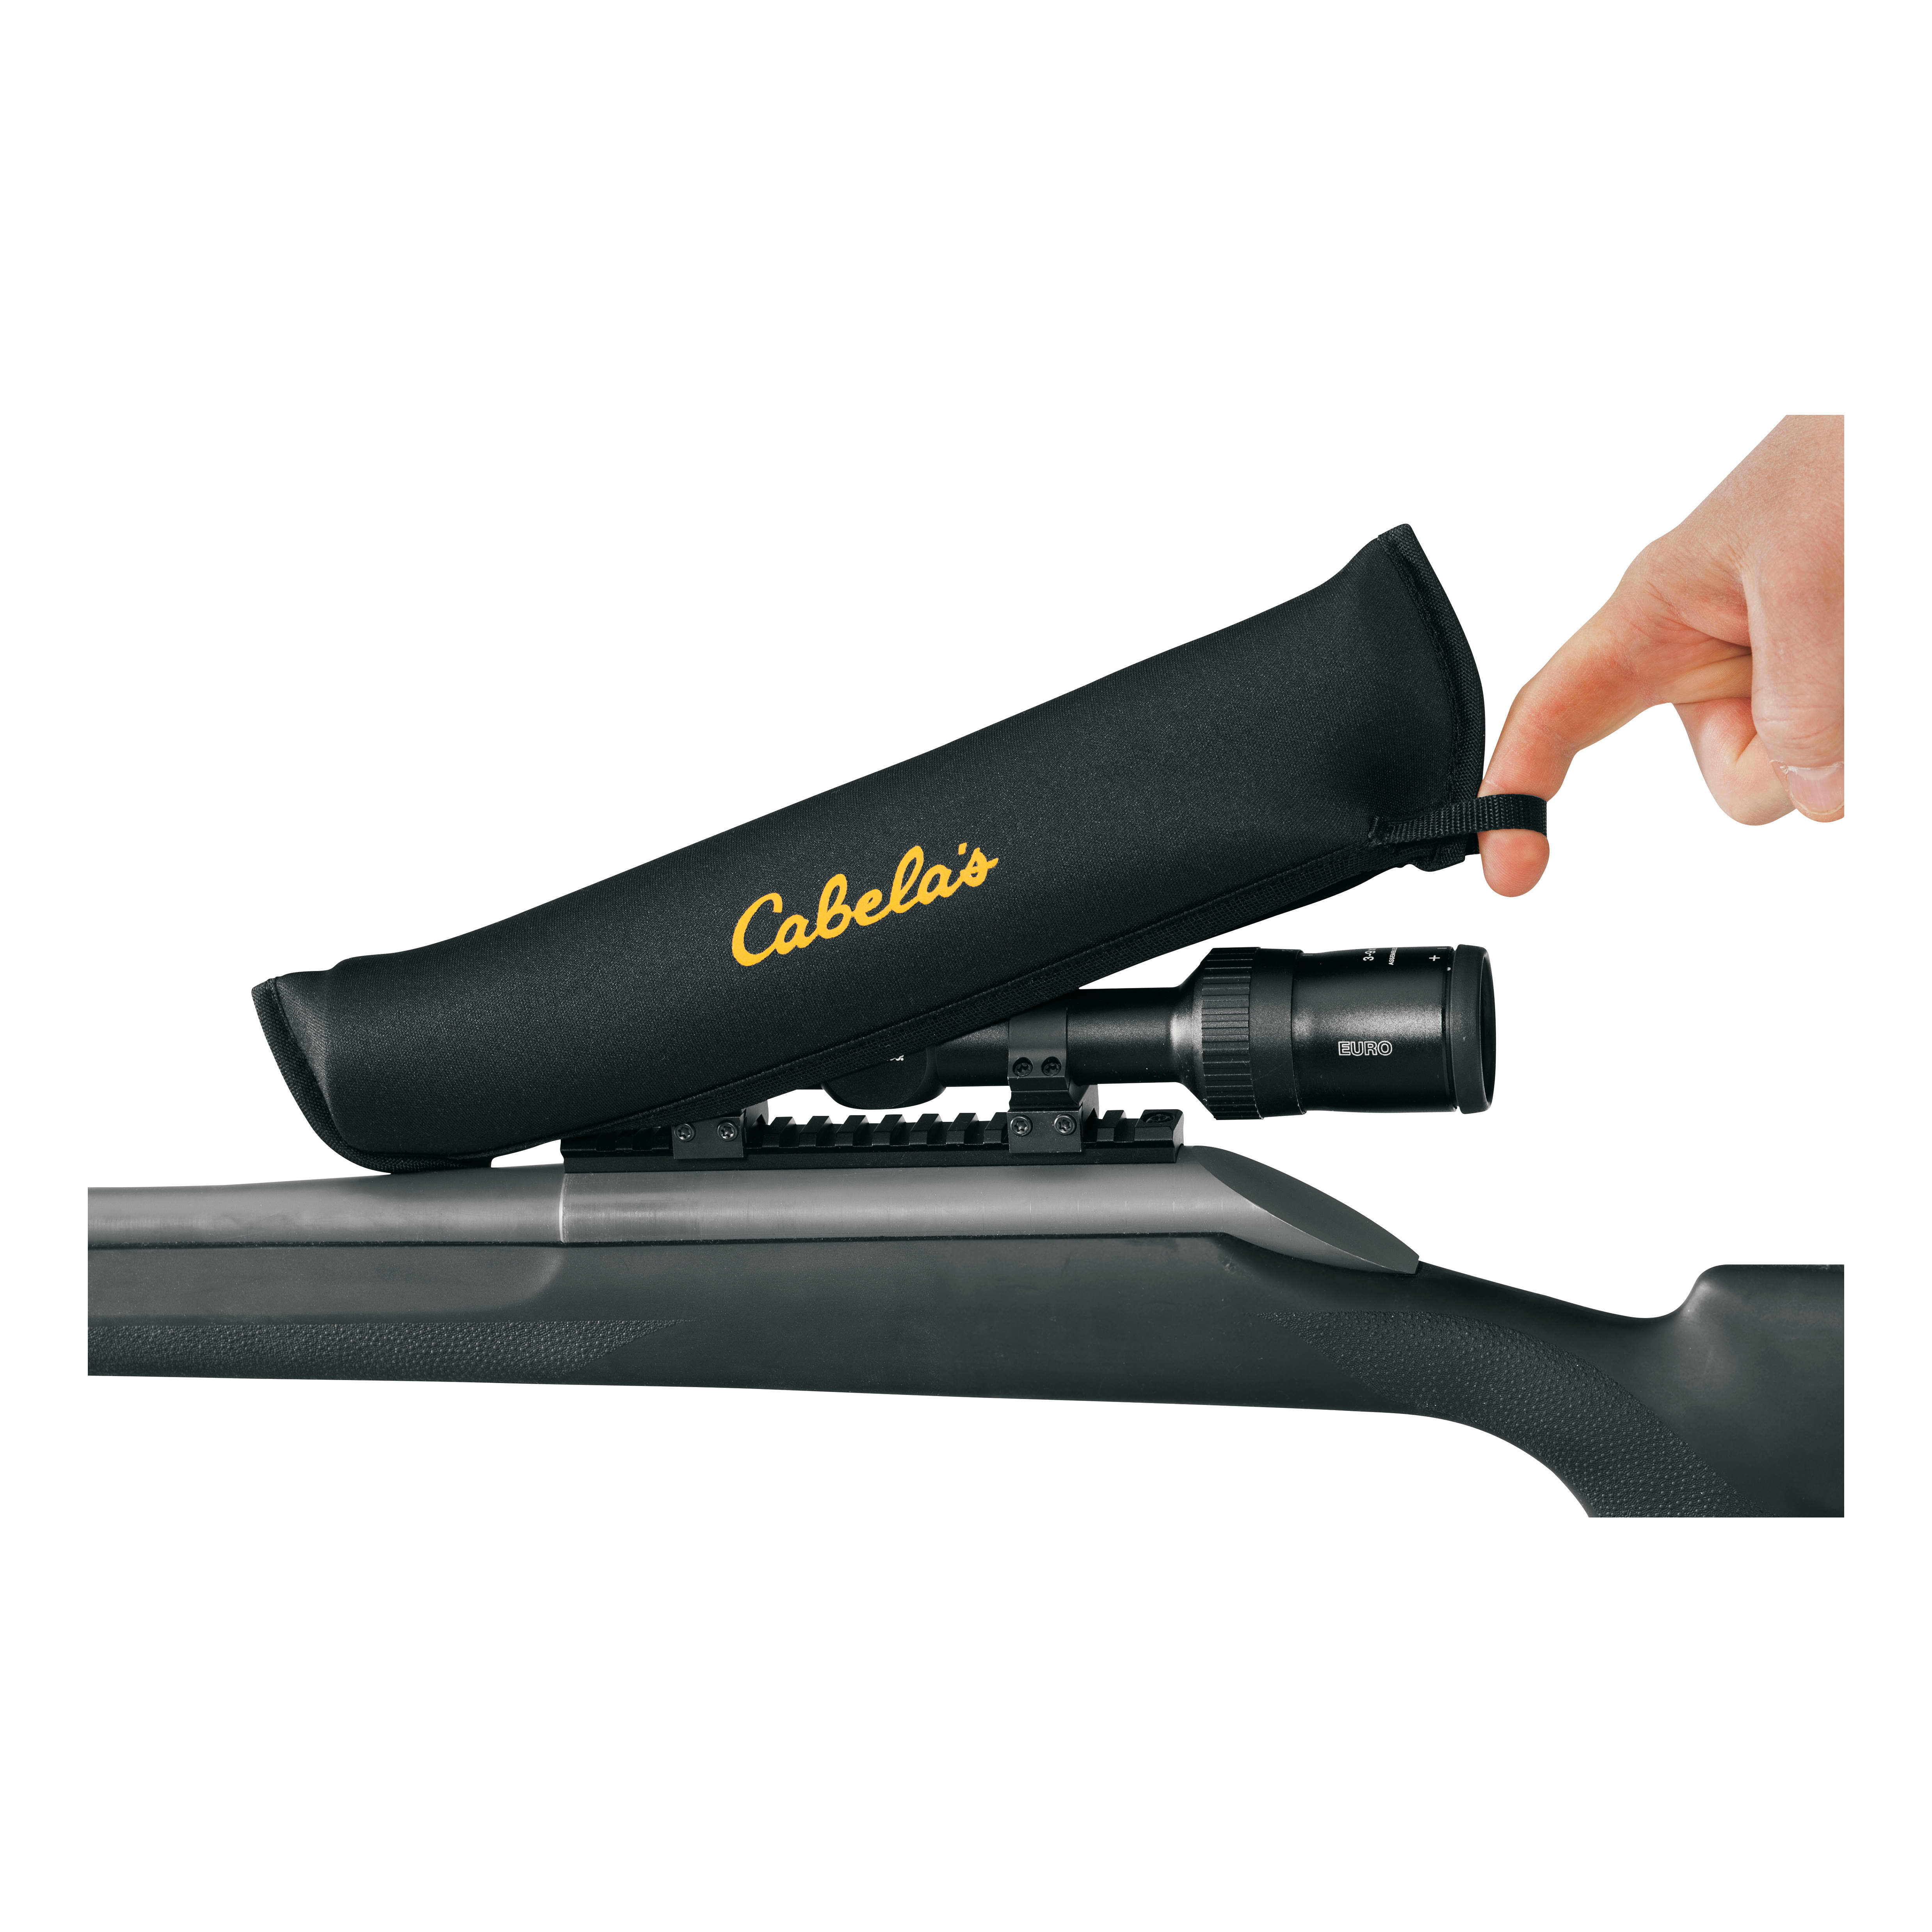 Cabela's Riflescope Covers - Easy to Install